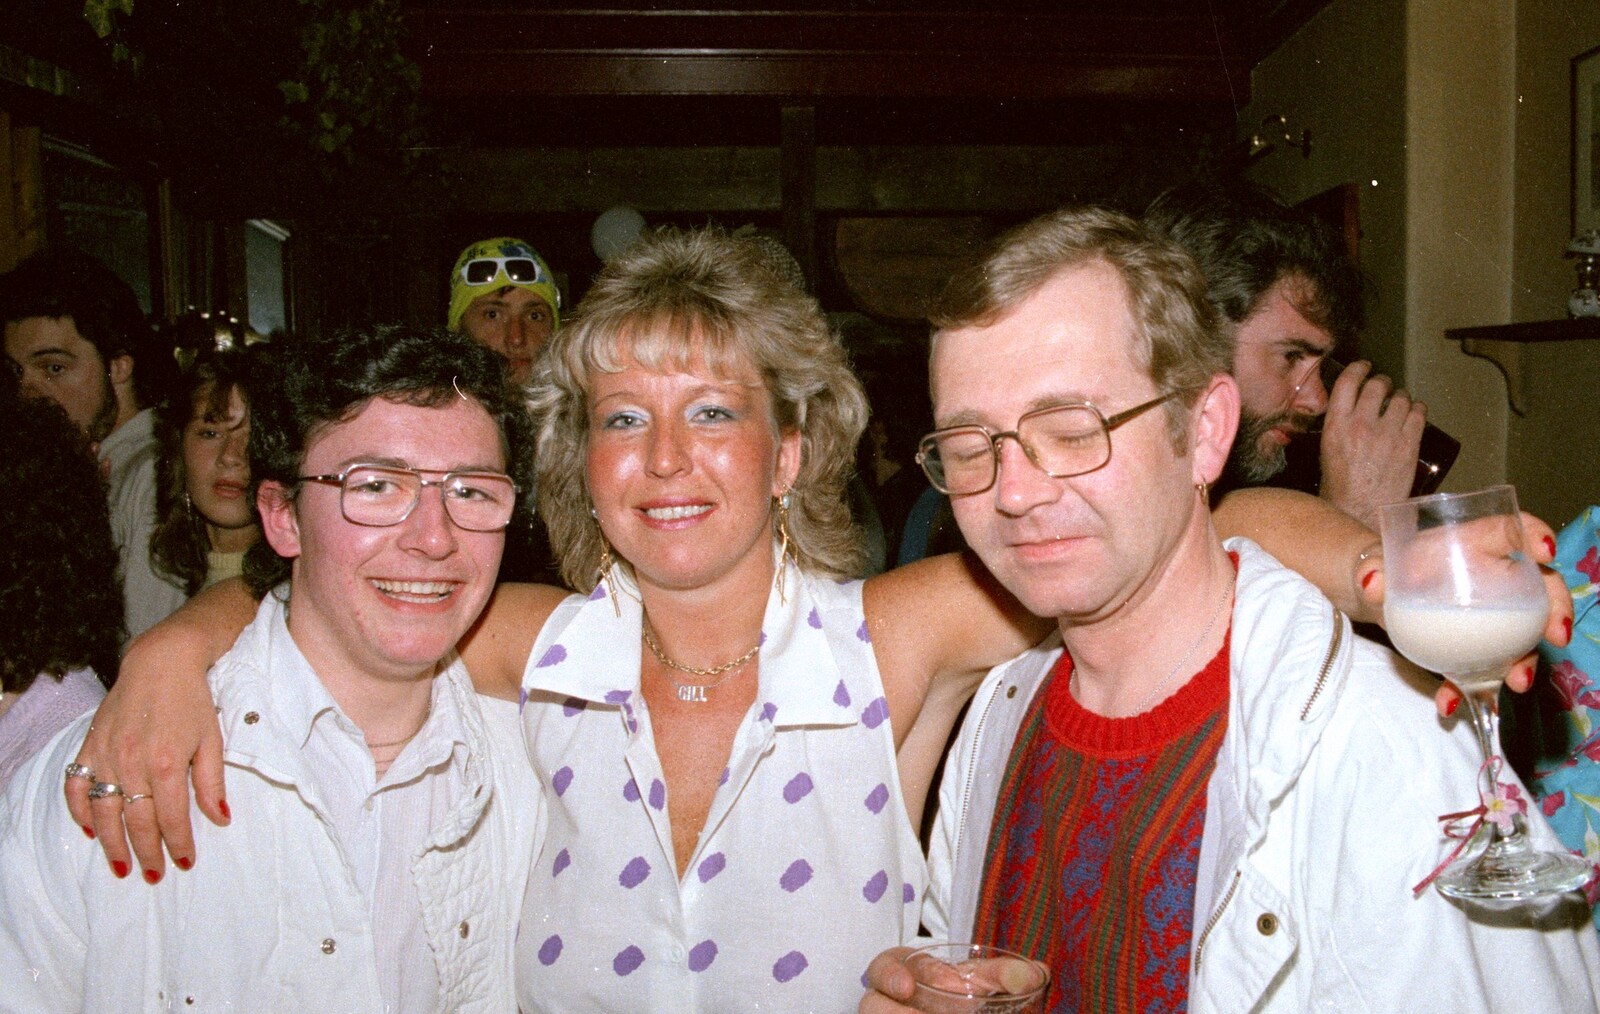 Uni: Gill Leaves the James Street Vaults, Plymouth - 30th May 1986: Gill and a couple of regulars